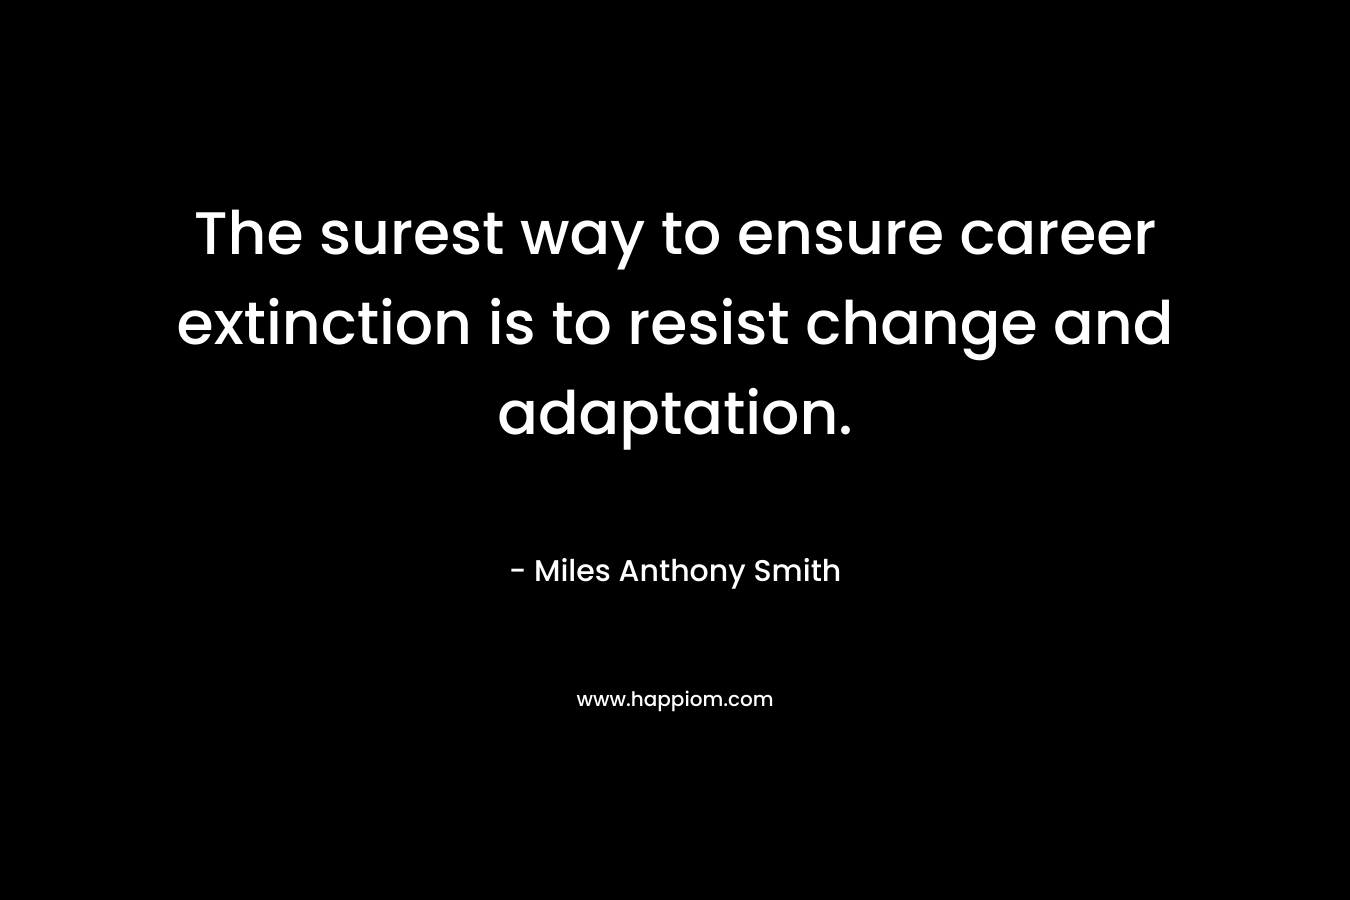 The surest way to ensure career extinction is to resist change and adaptation. – Miles Anthony Smith